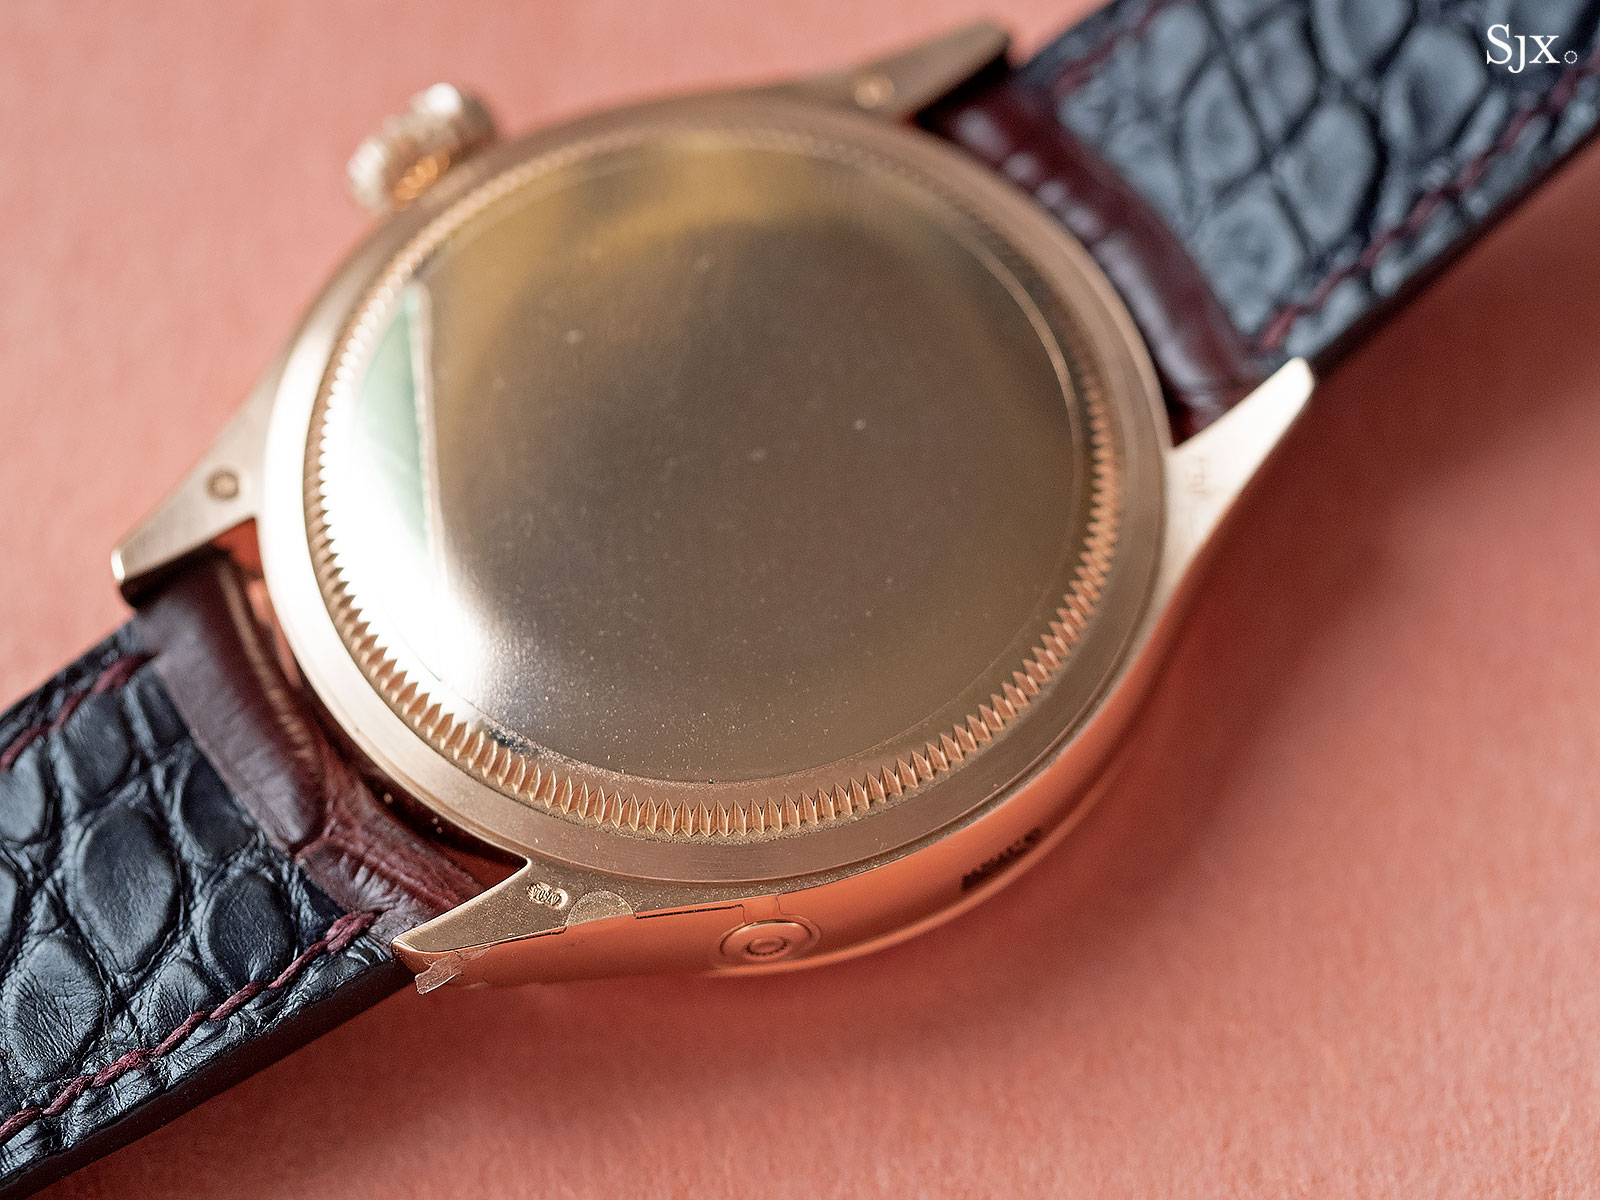 Rolex Cellini Moonphase 50535 review 7